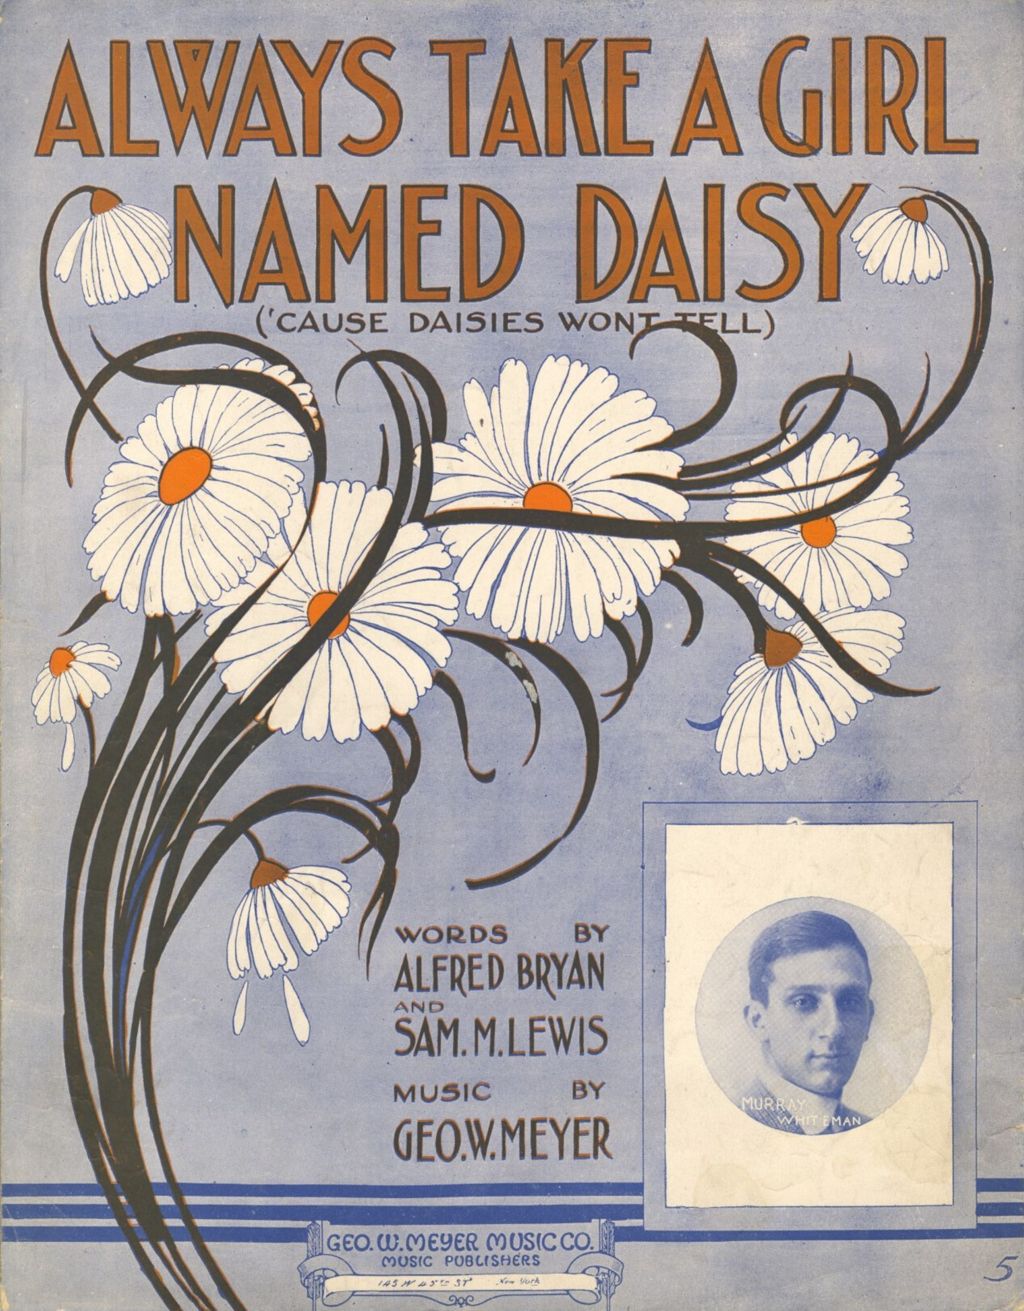 Miniature of Always Take a Girl Named "Daisy" ('Cause Daisies Won't Tell)